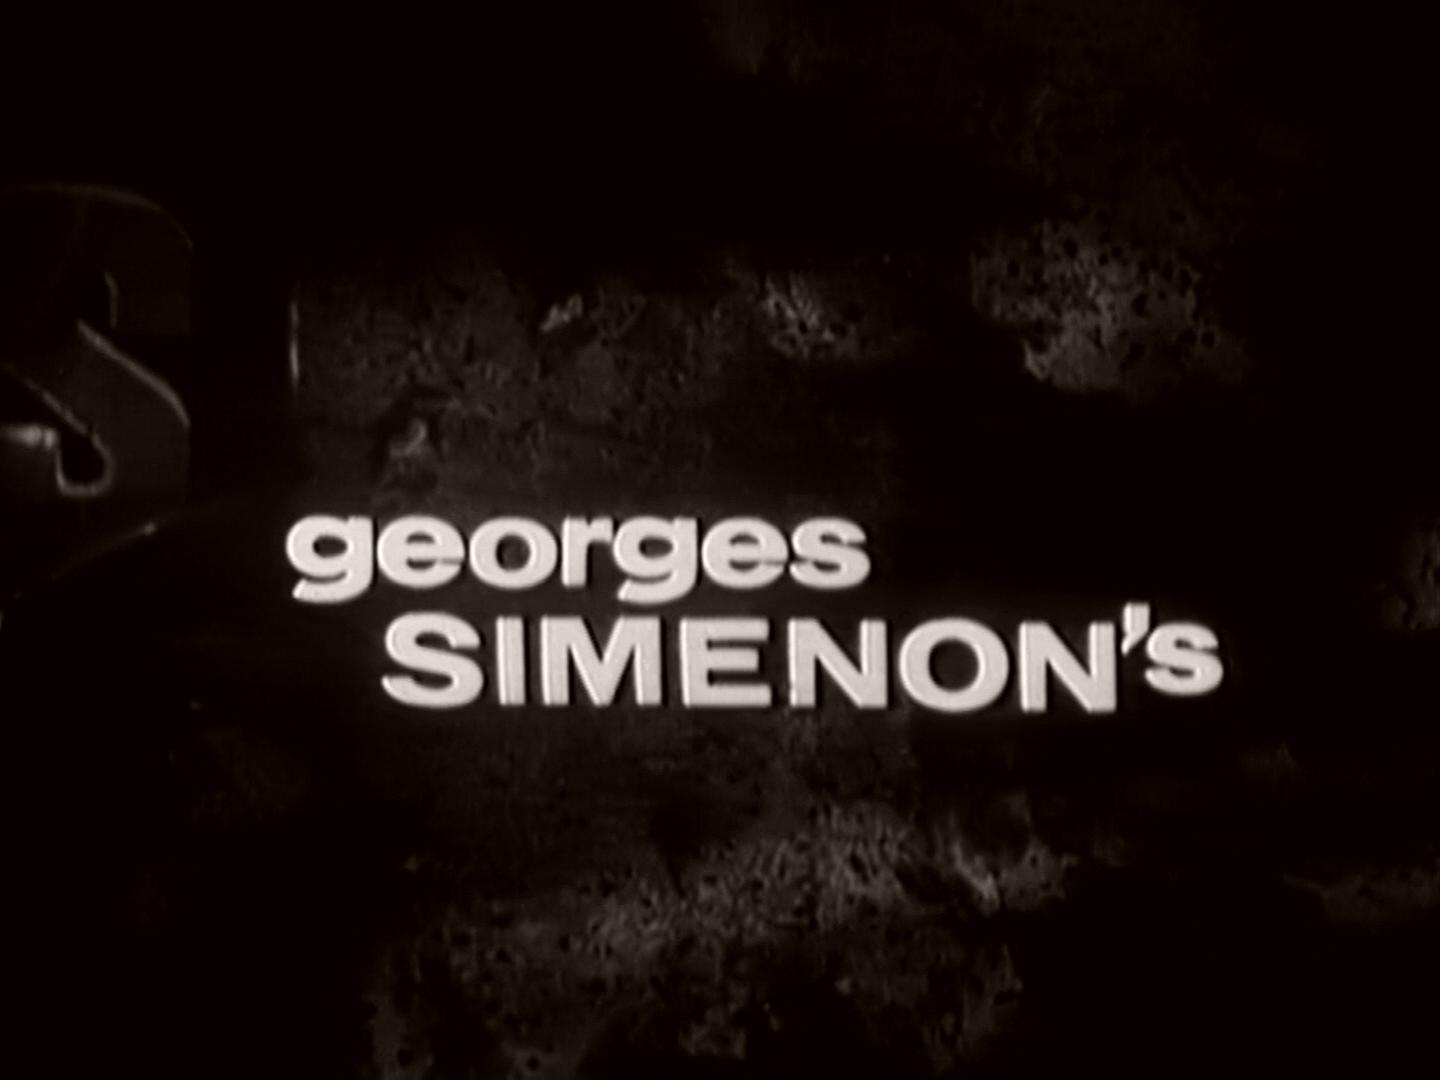 Main title from Maigret (1960-63) (1). Georges Simenon’s